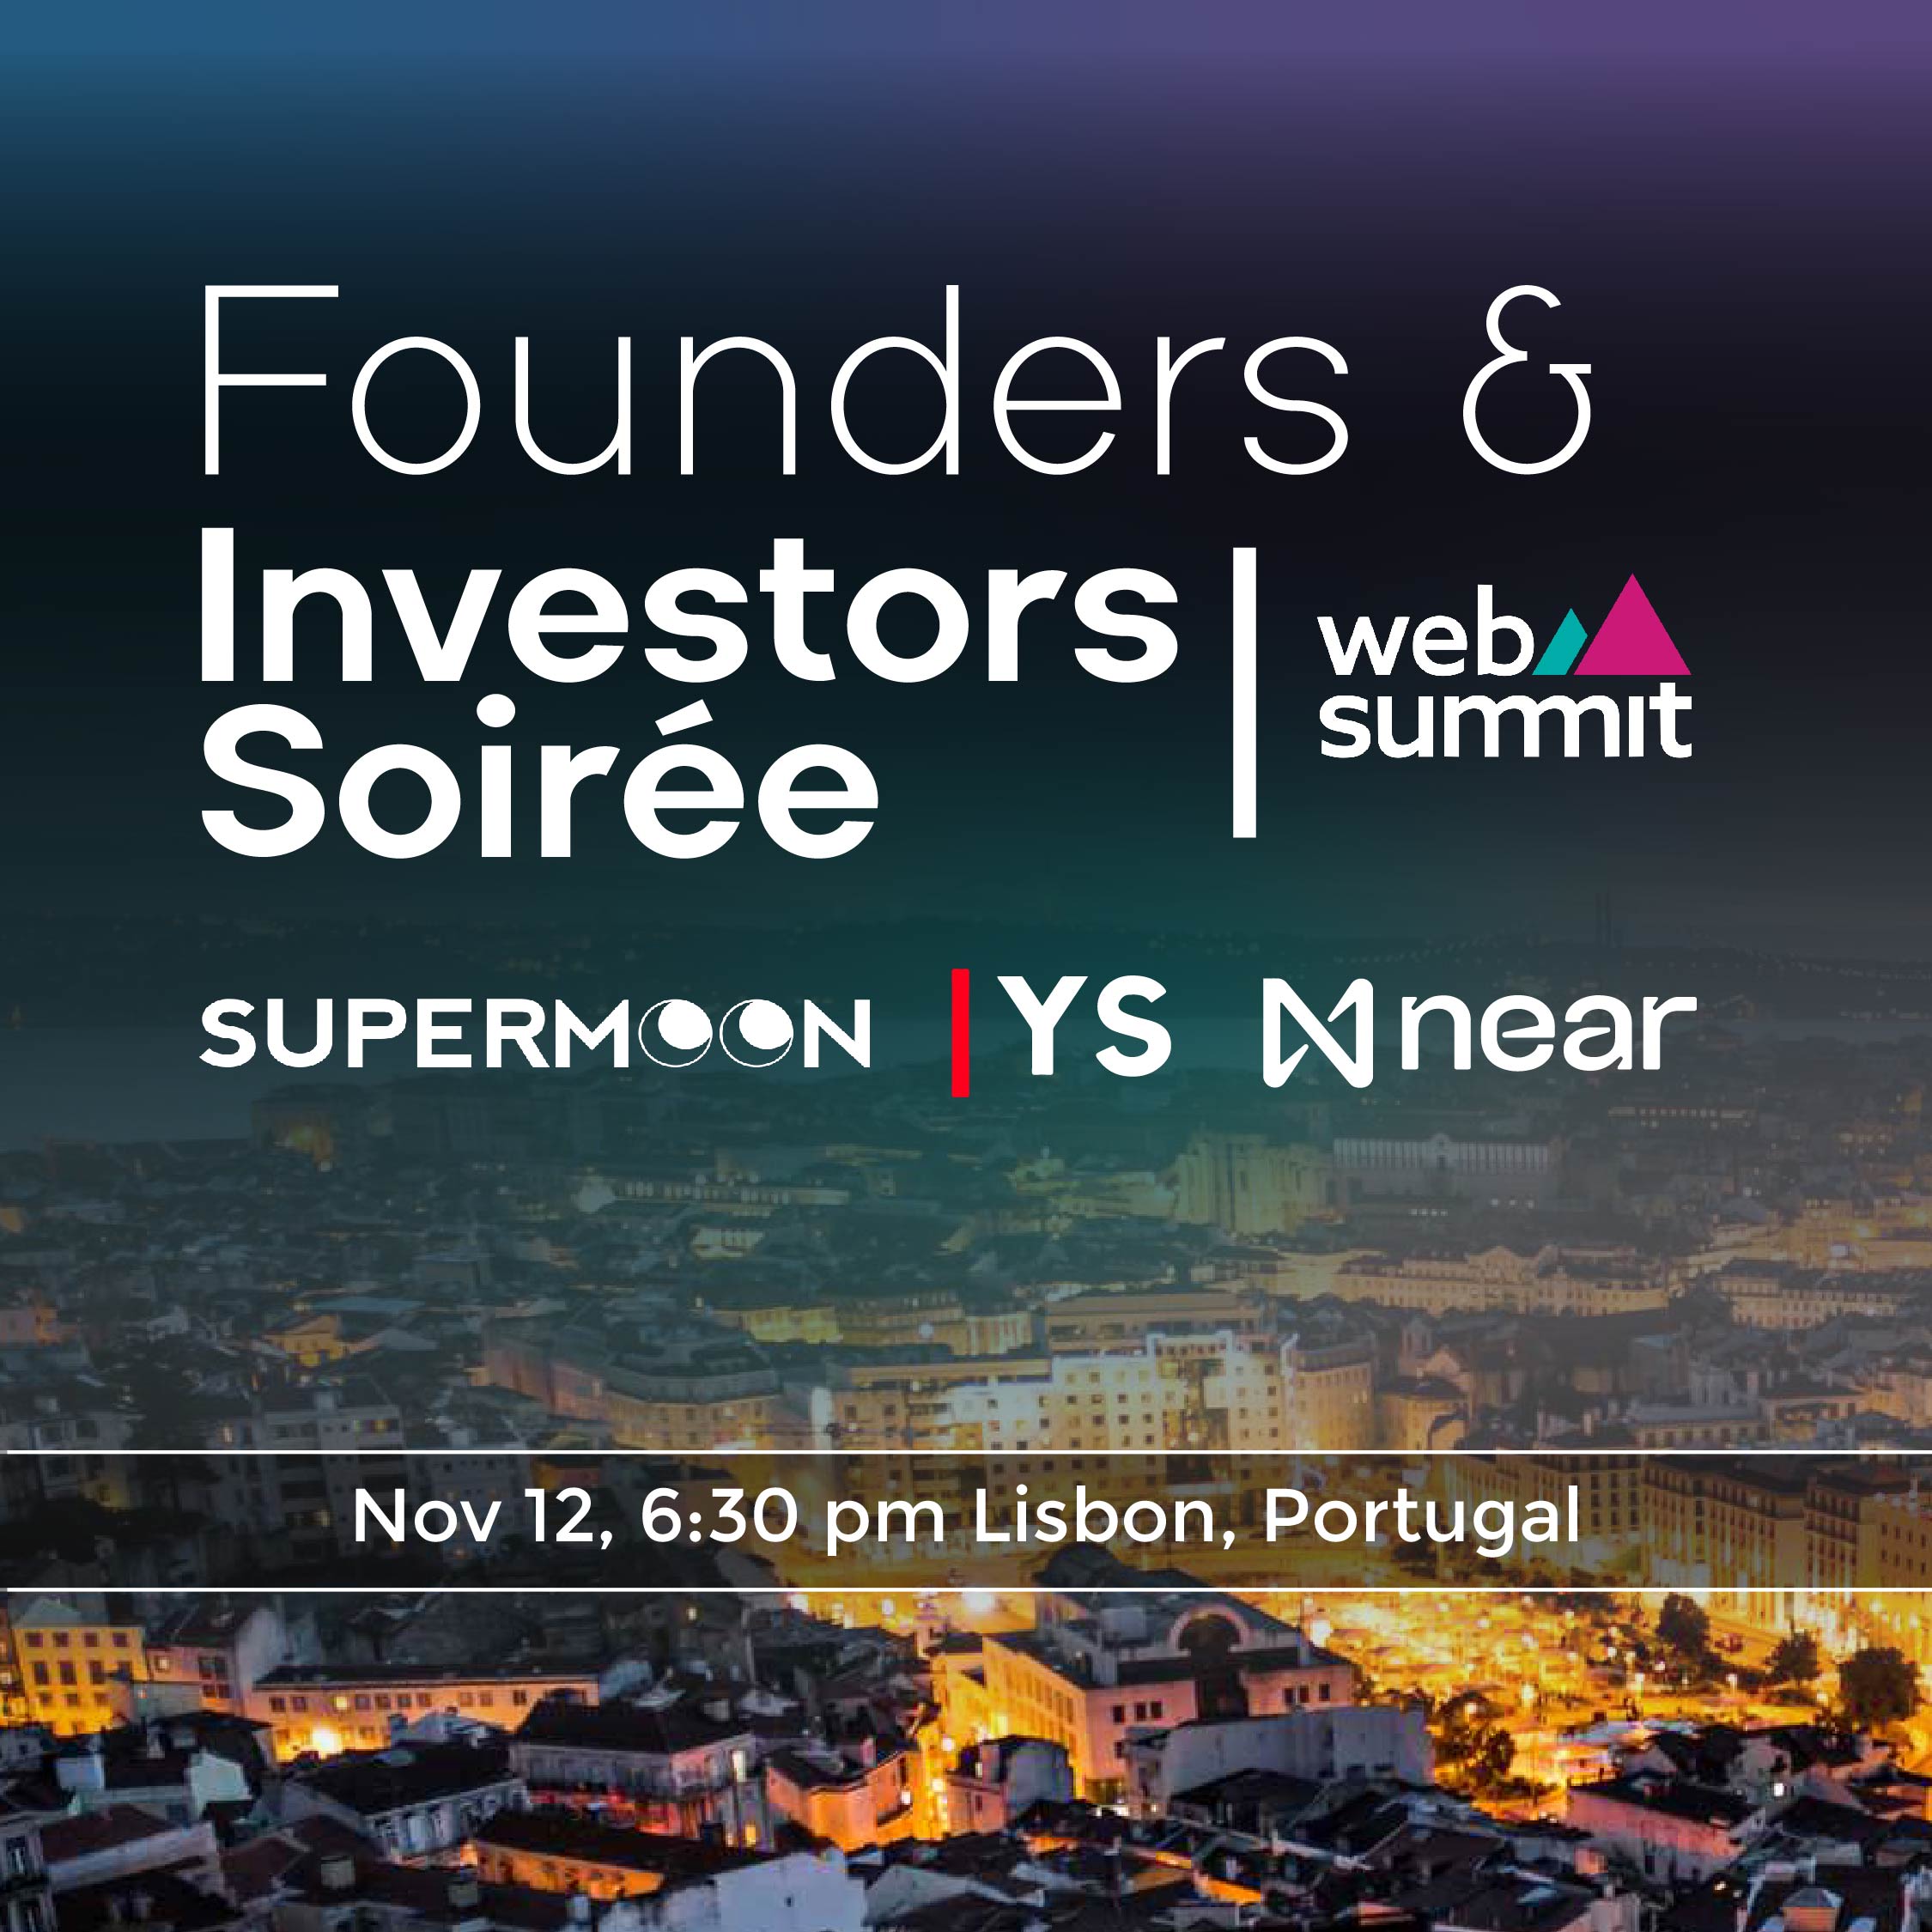 Founders and Investors Soirée @ WebSummit by Yorkseed and Supermoon